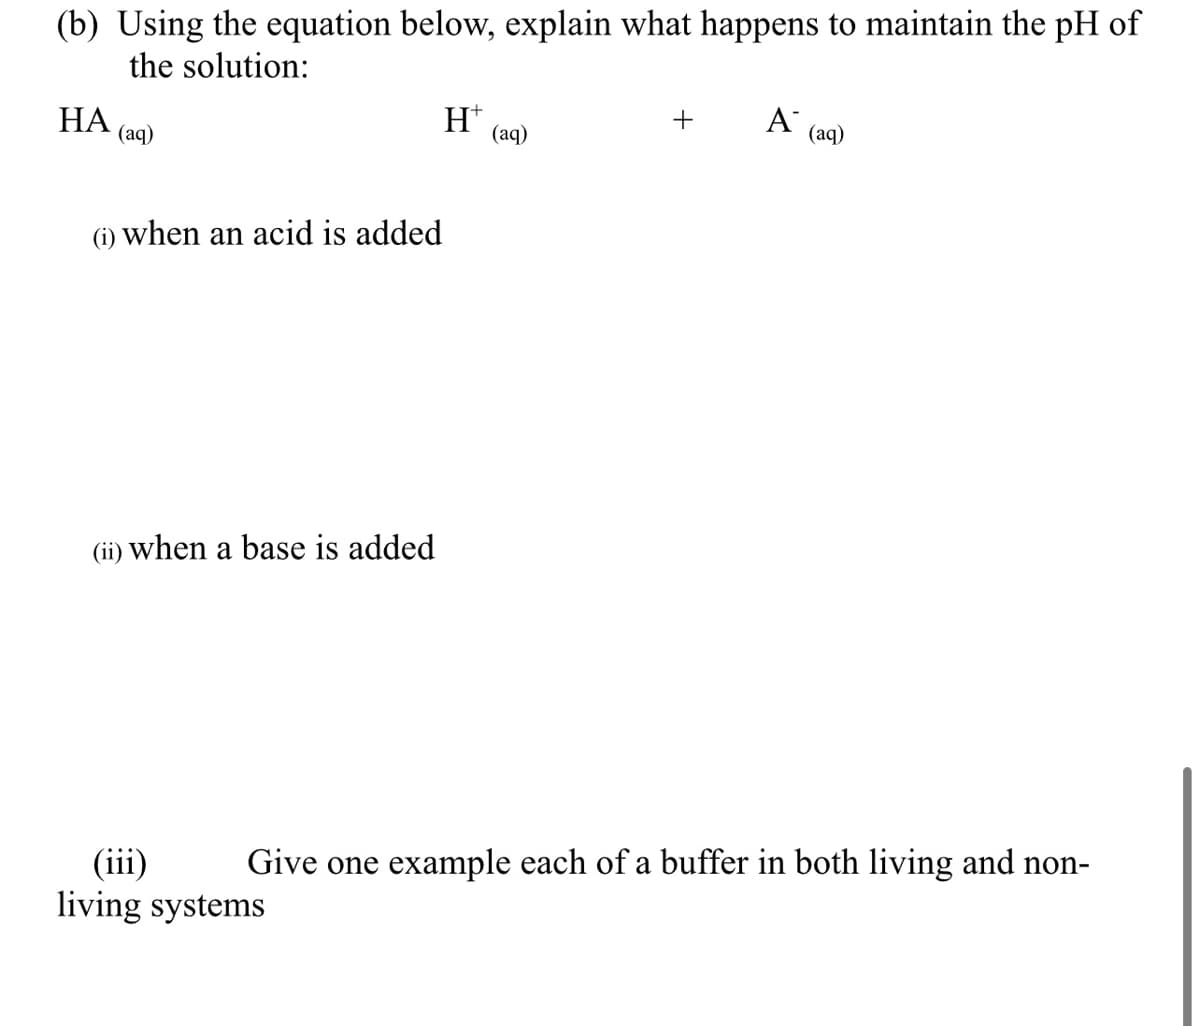 (b) Using the equation below, explain what happens to maintain the pH of
the solution:
HA
H+
+
A
(aq)
(aq)
(aq)
(i) when an acid is added
(ii) when a base is added
(iii)
Give one example each of a buffer in both living and non-
living systems